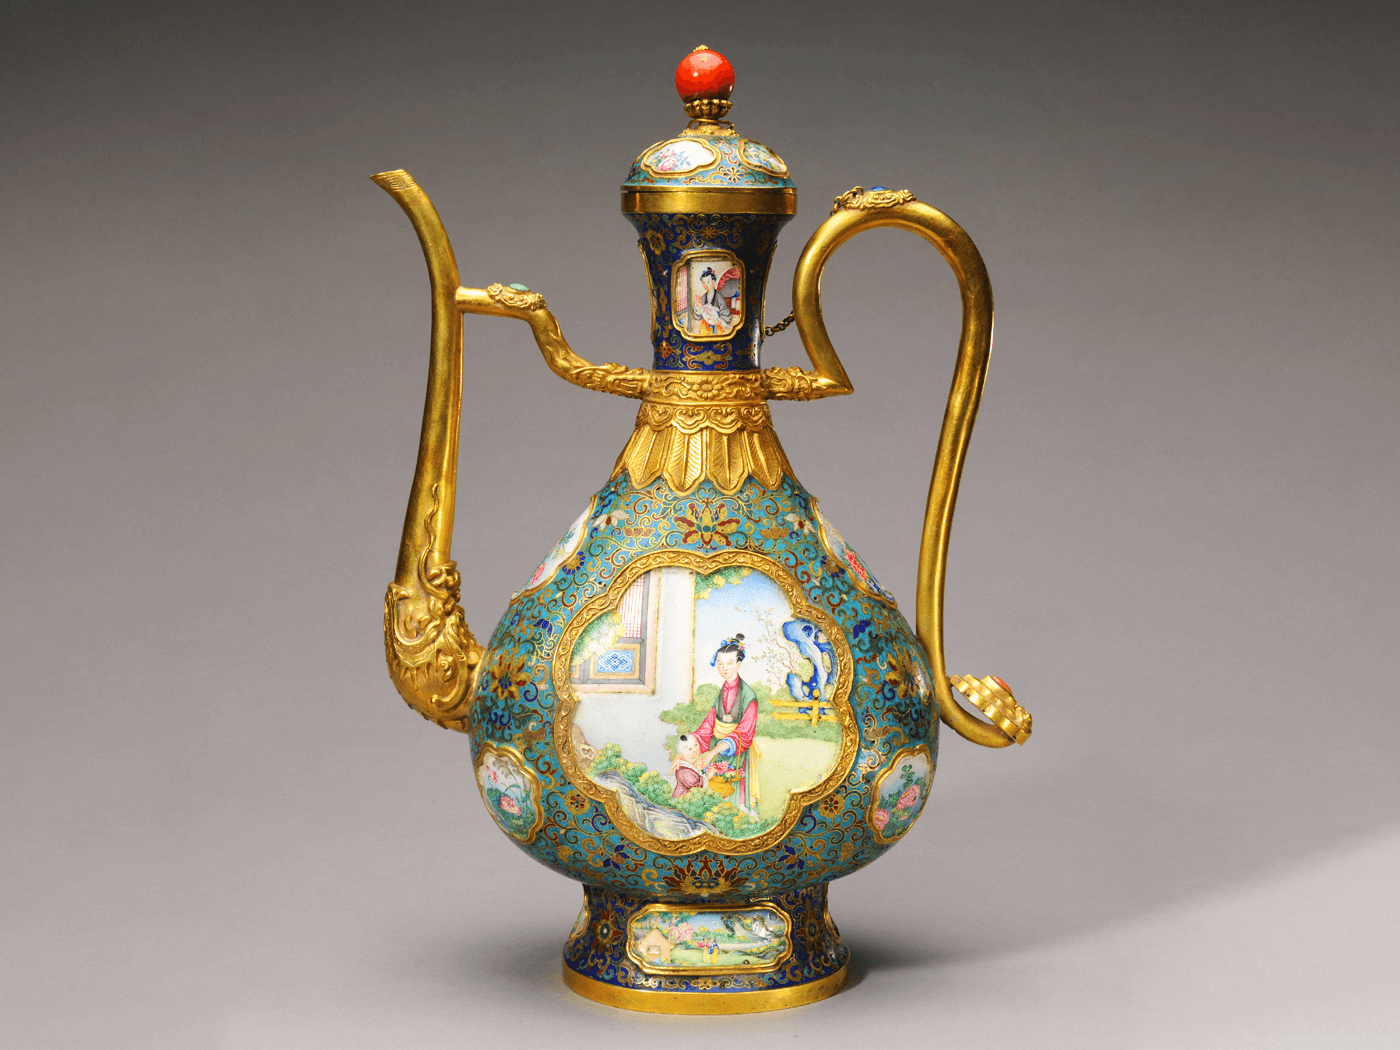 Ewer with figures and flowers in a cartouche